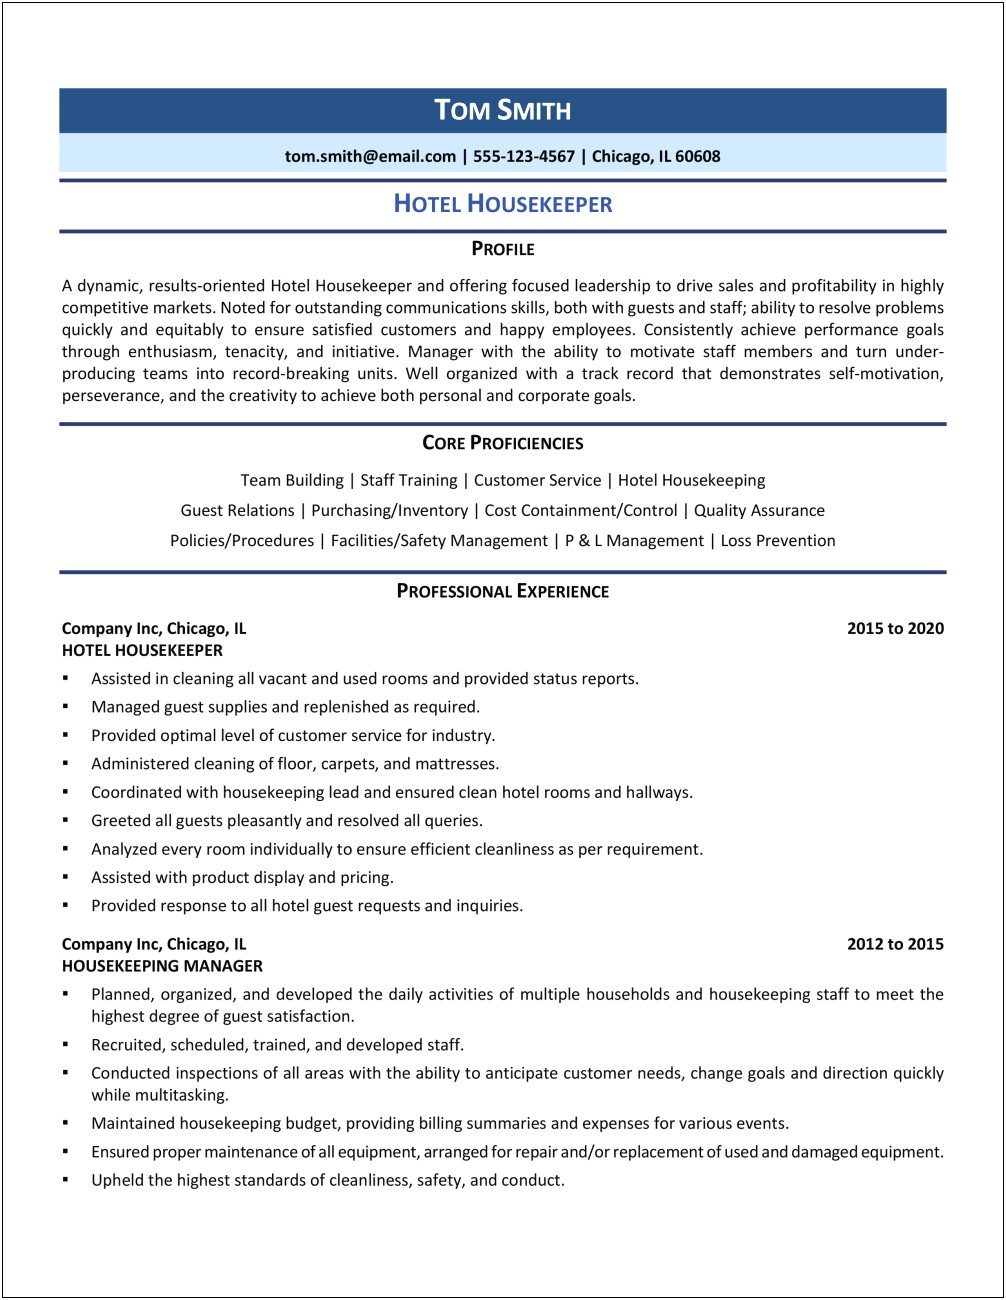 Resume Objective For Hospital Housekeeping